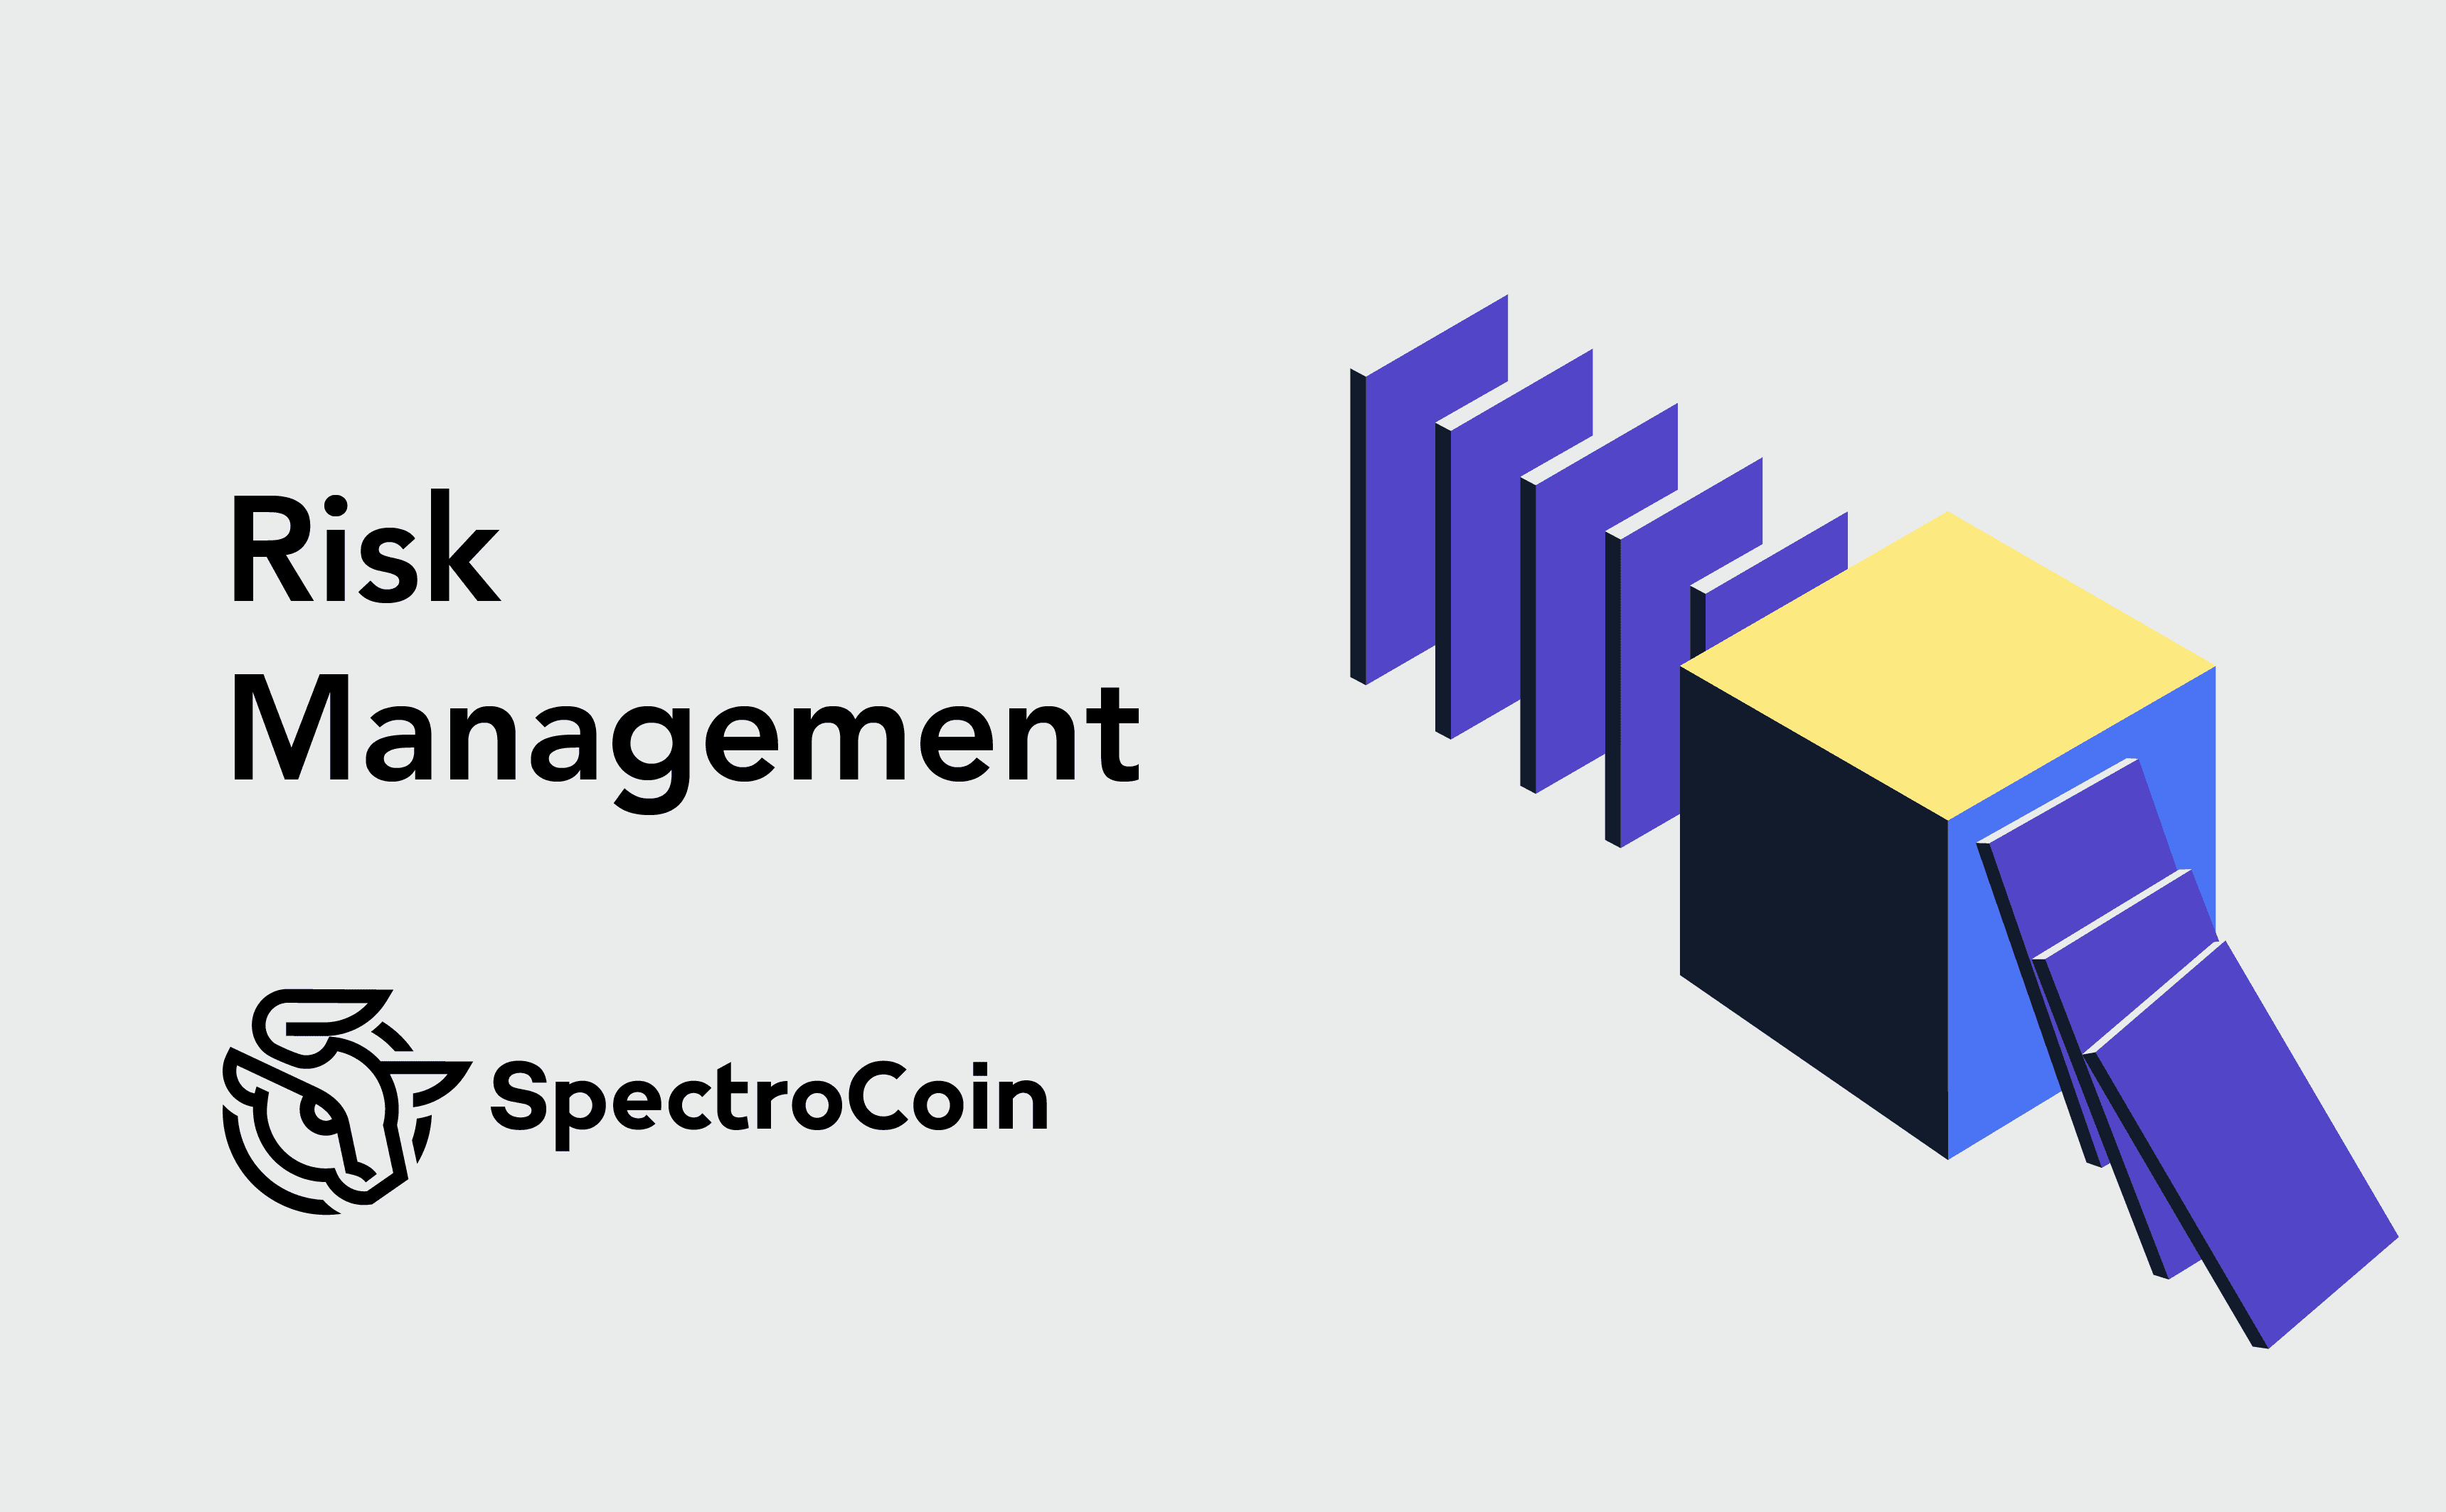 Effective risk management process at SpectroCoin.